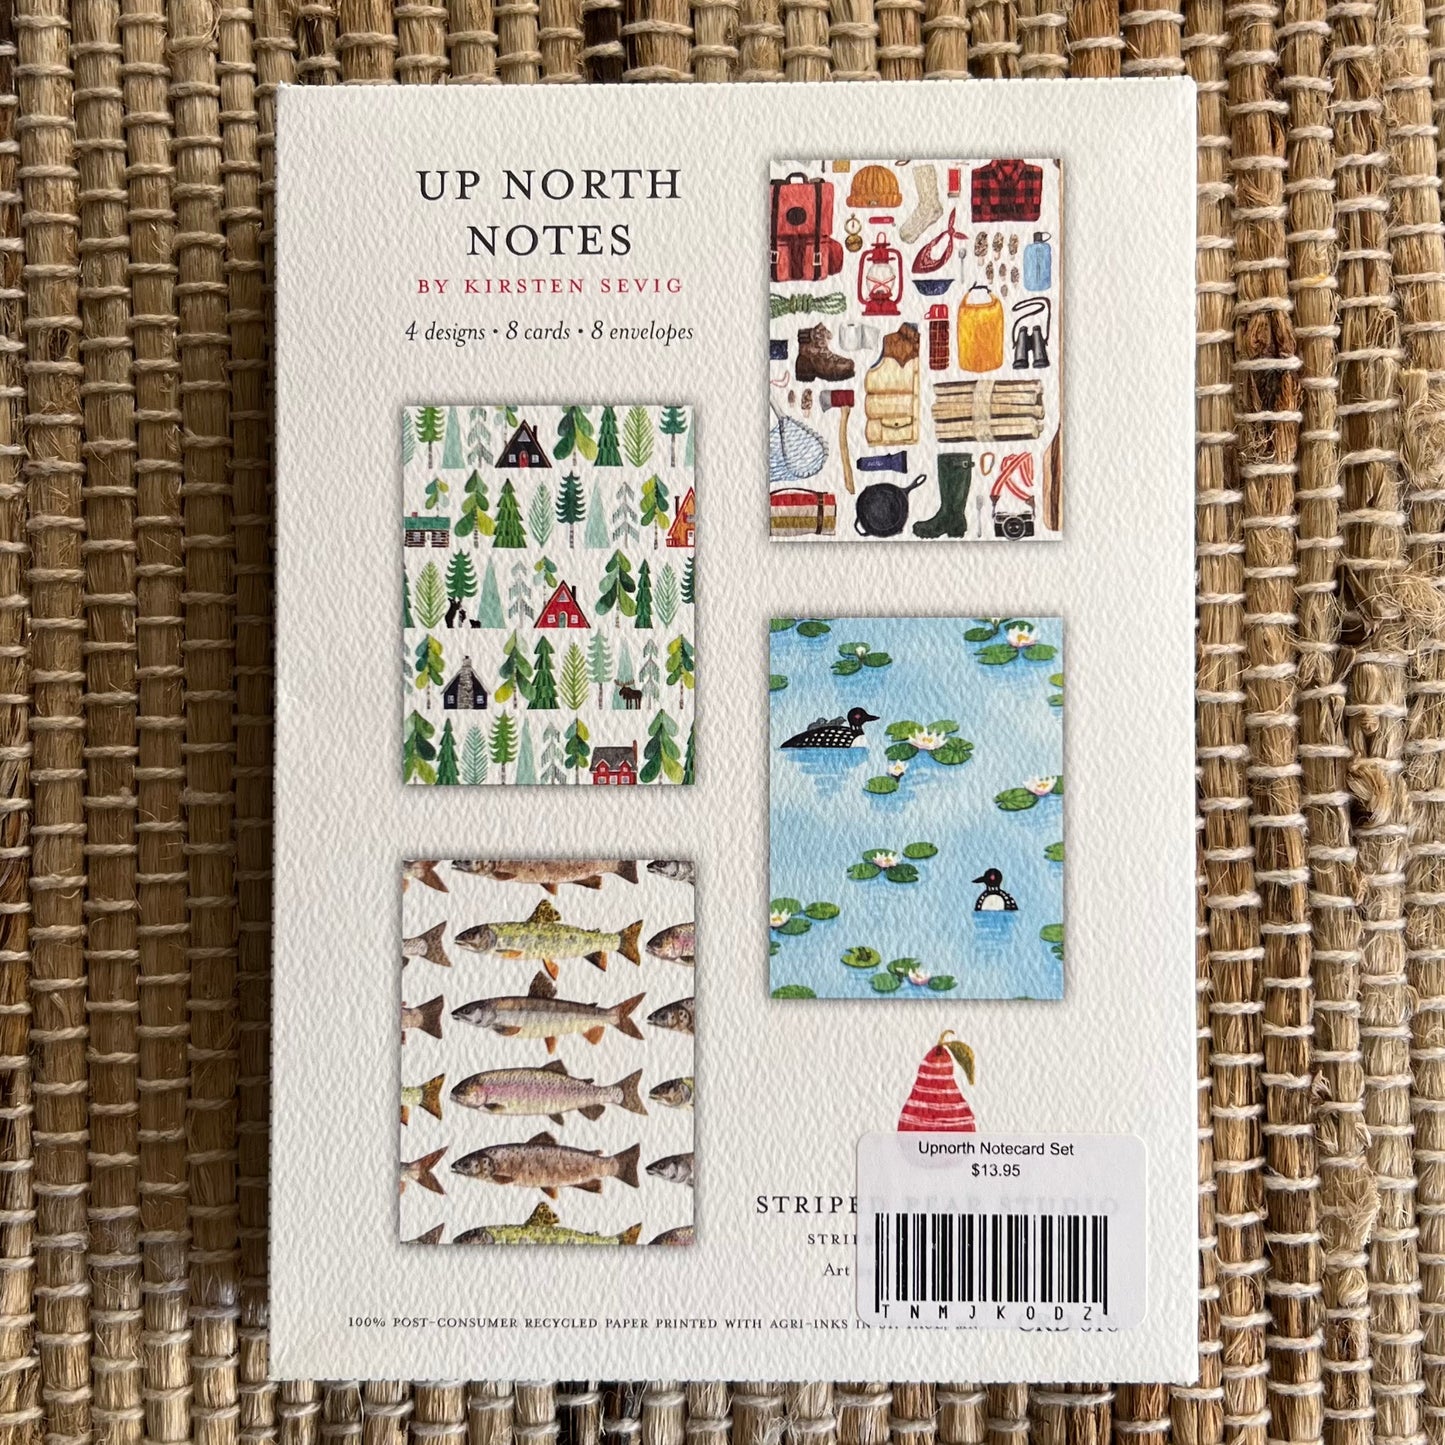 Up North Notes By Kristen Sevig